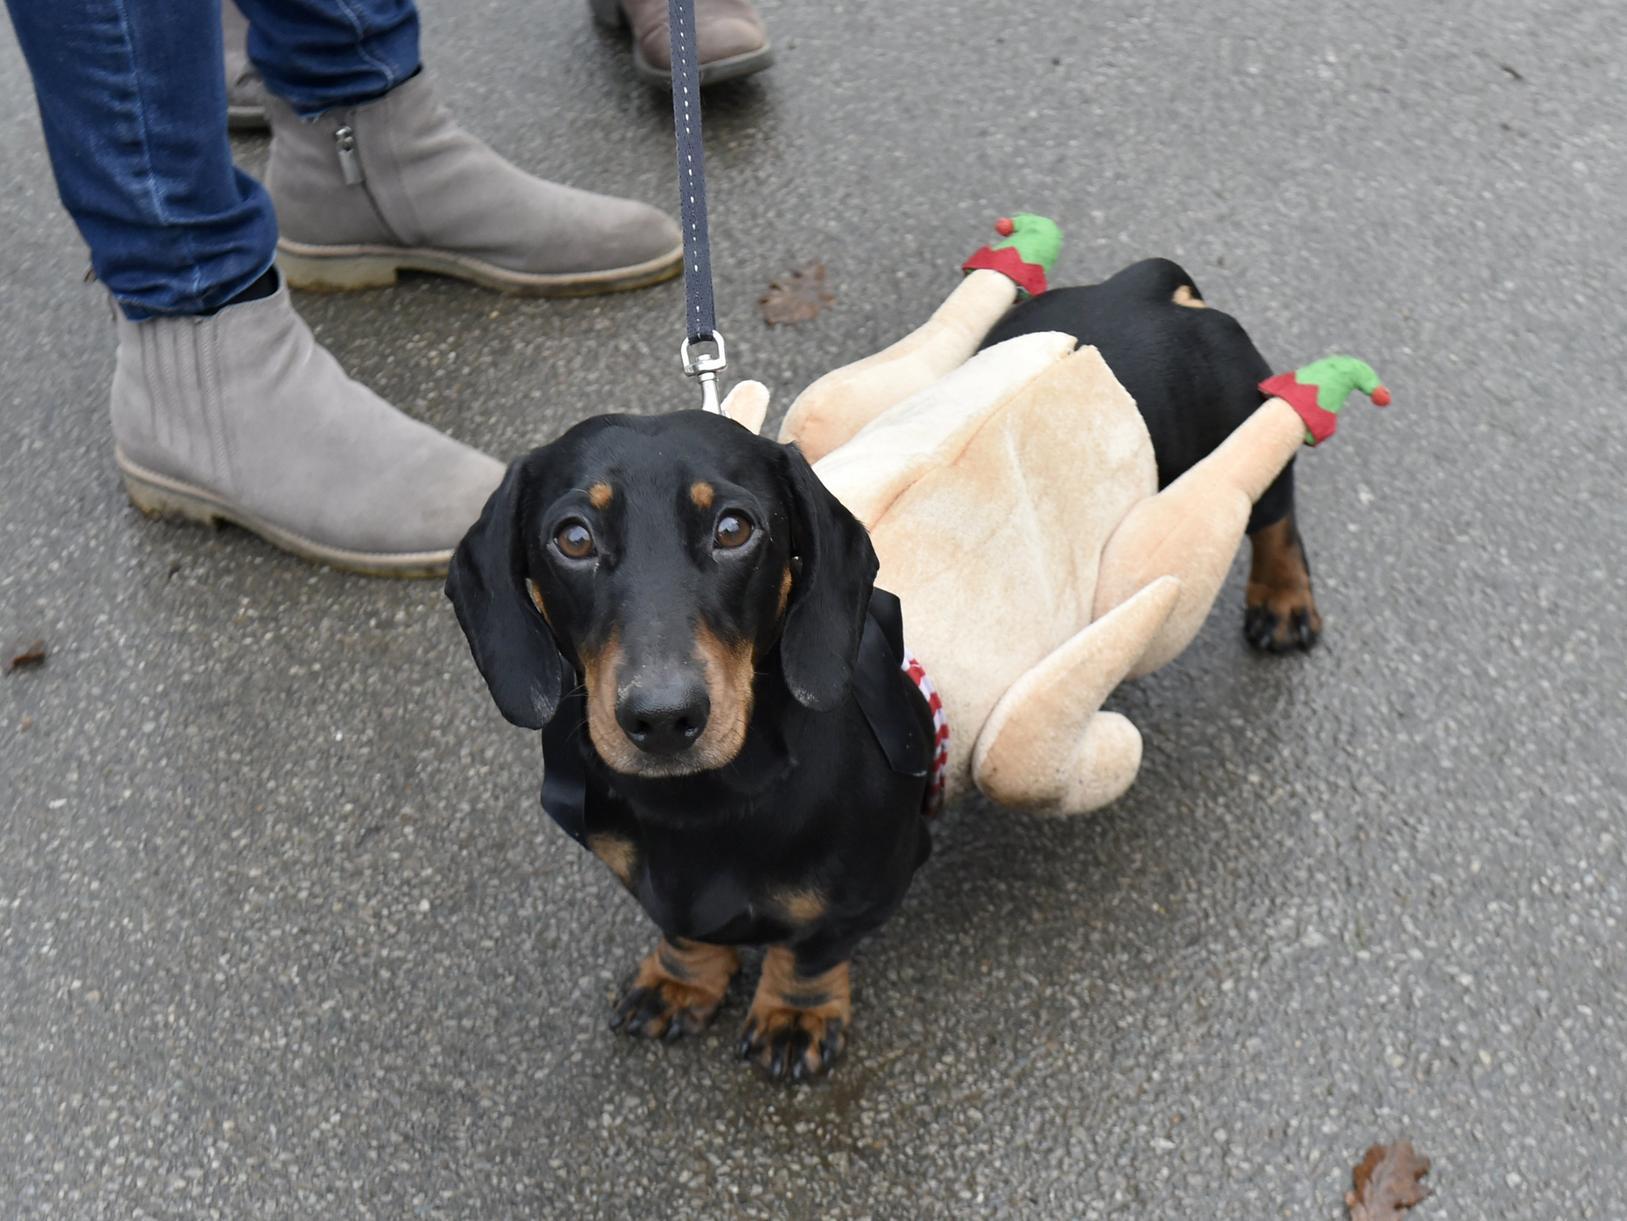 We can't get enough of Monty in his Christmas turkey outfit!